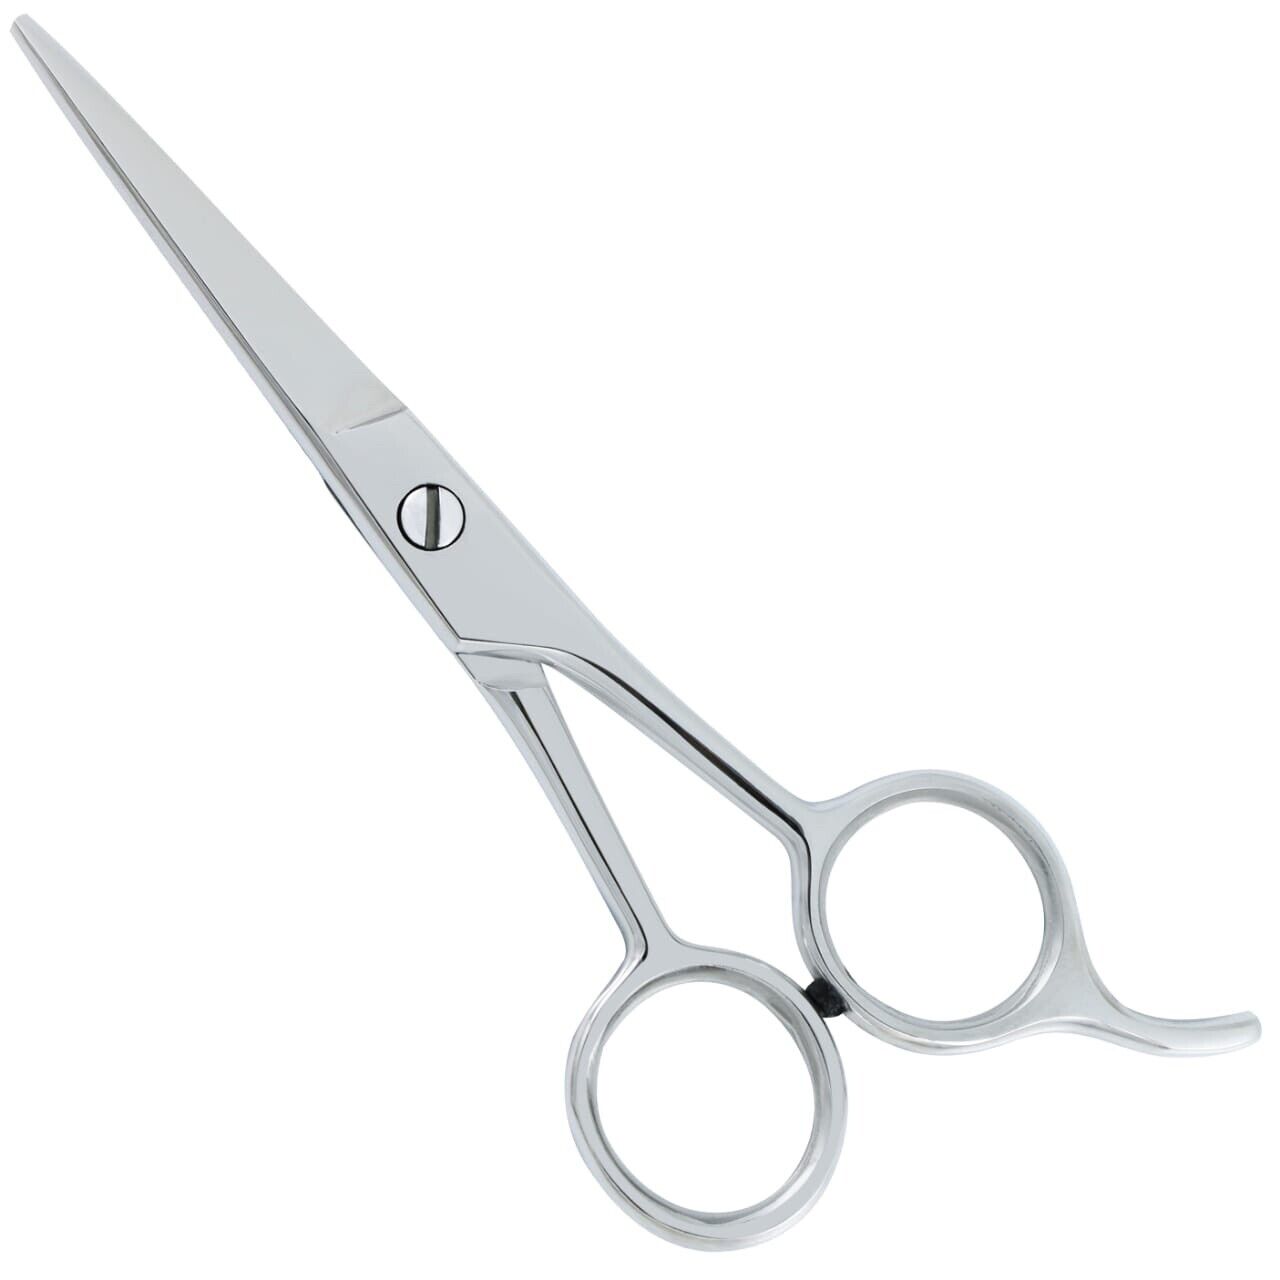 PROFESSIONAL SALON HAIR CUTTING&THINNING SCISSORS BARBER SHEARS HAIRDRESSING vertical int Does Not Apply - фотография #3